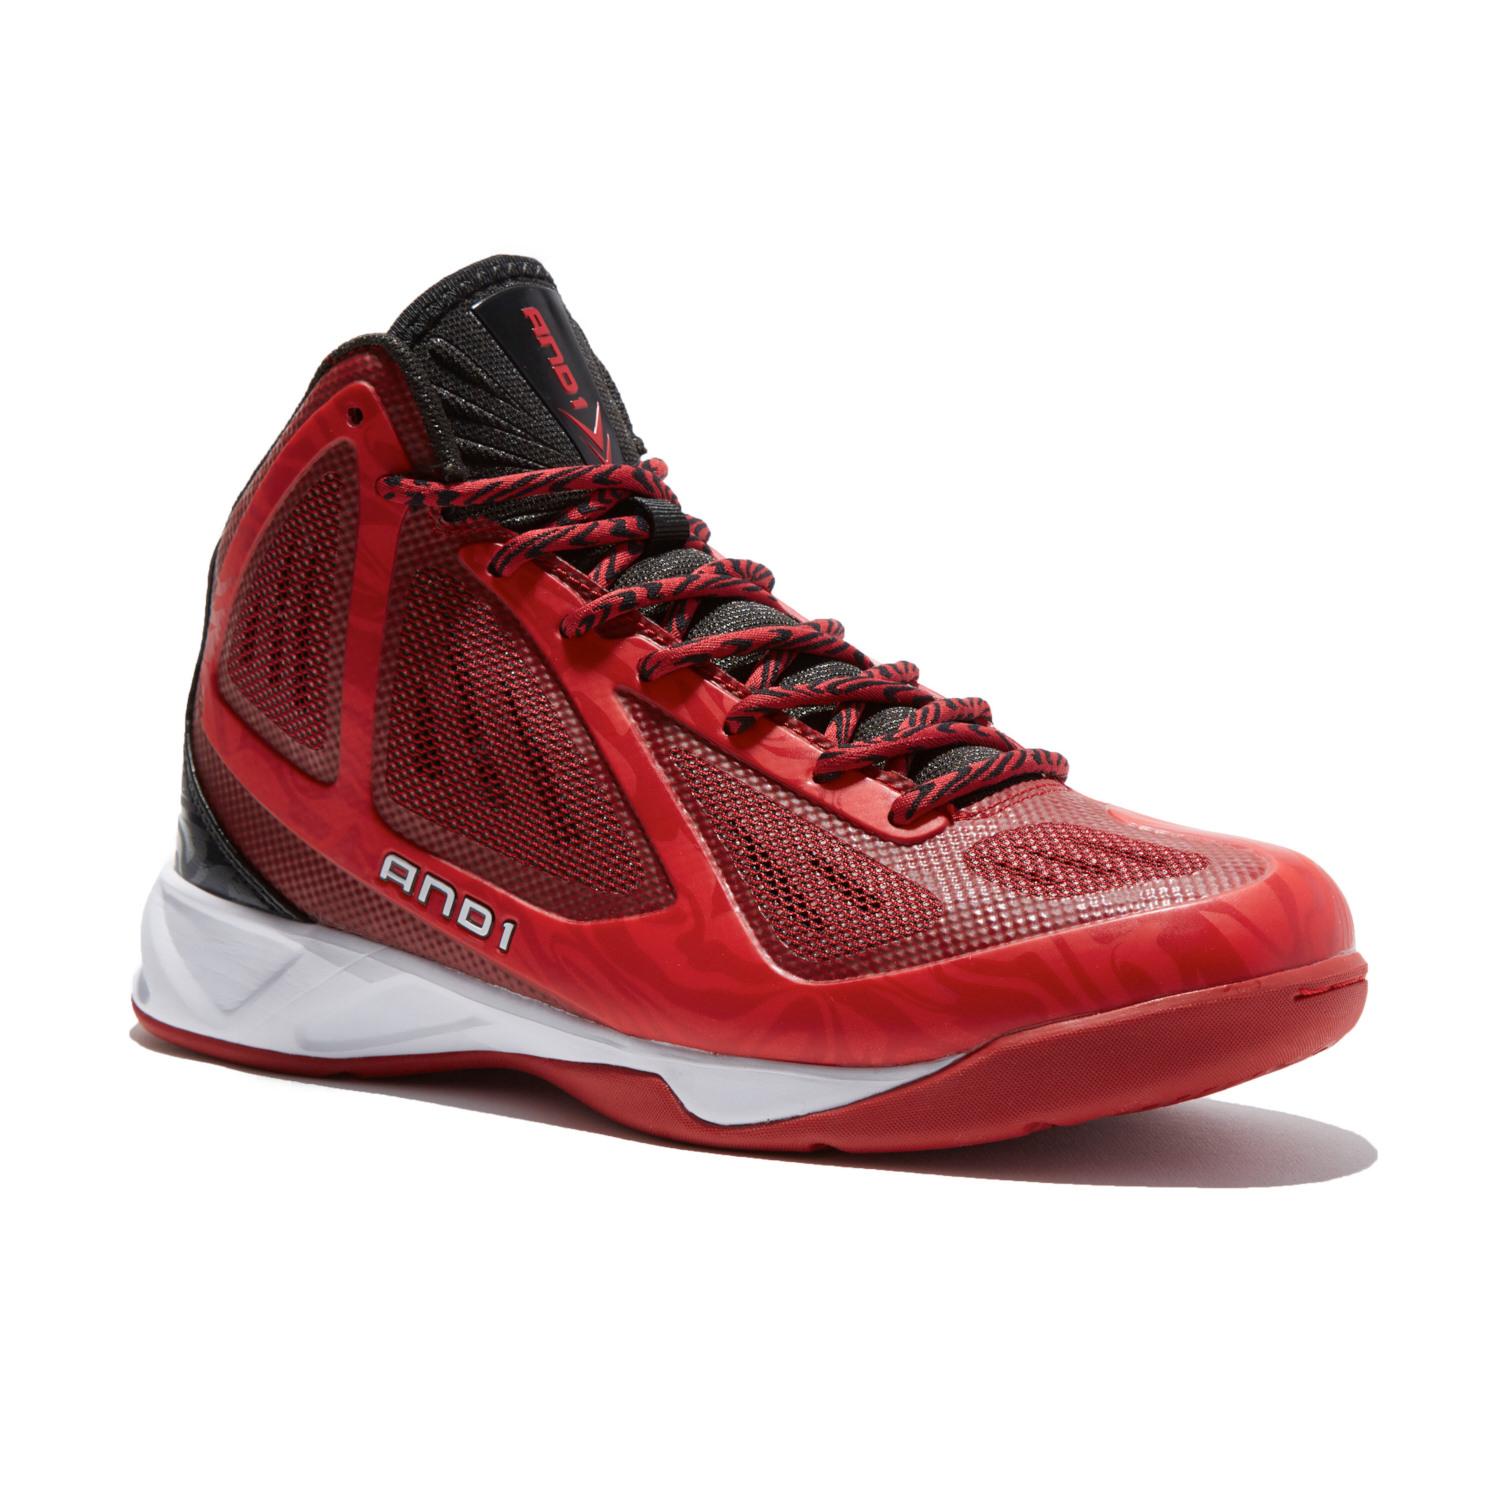 AND 1 Men's Xcelerate Red/Black/White Basketball Shoe